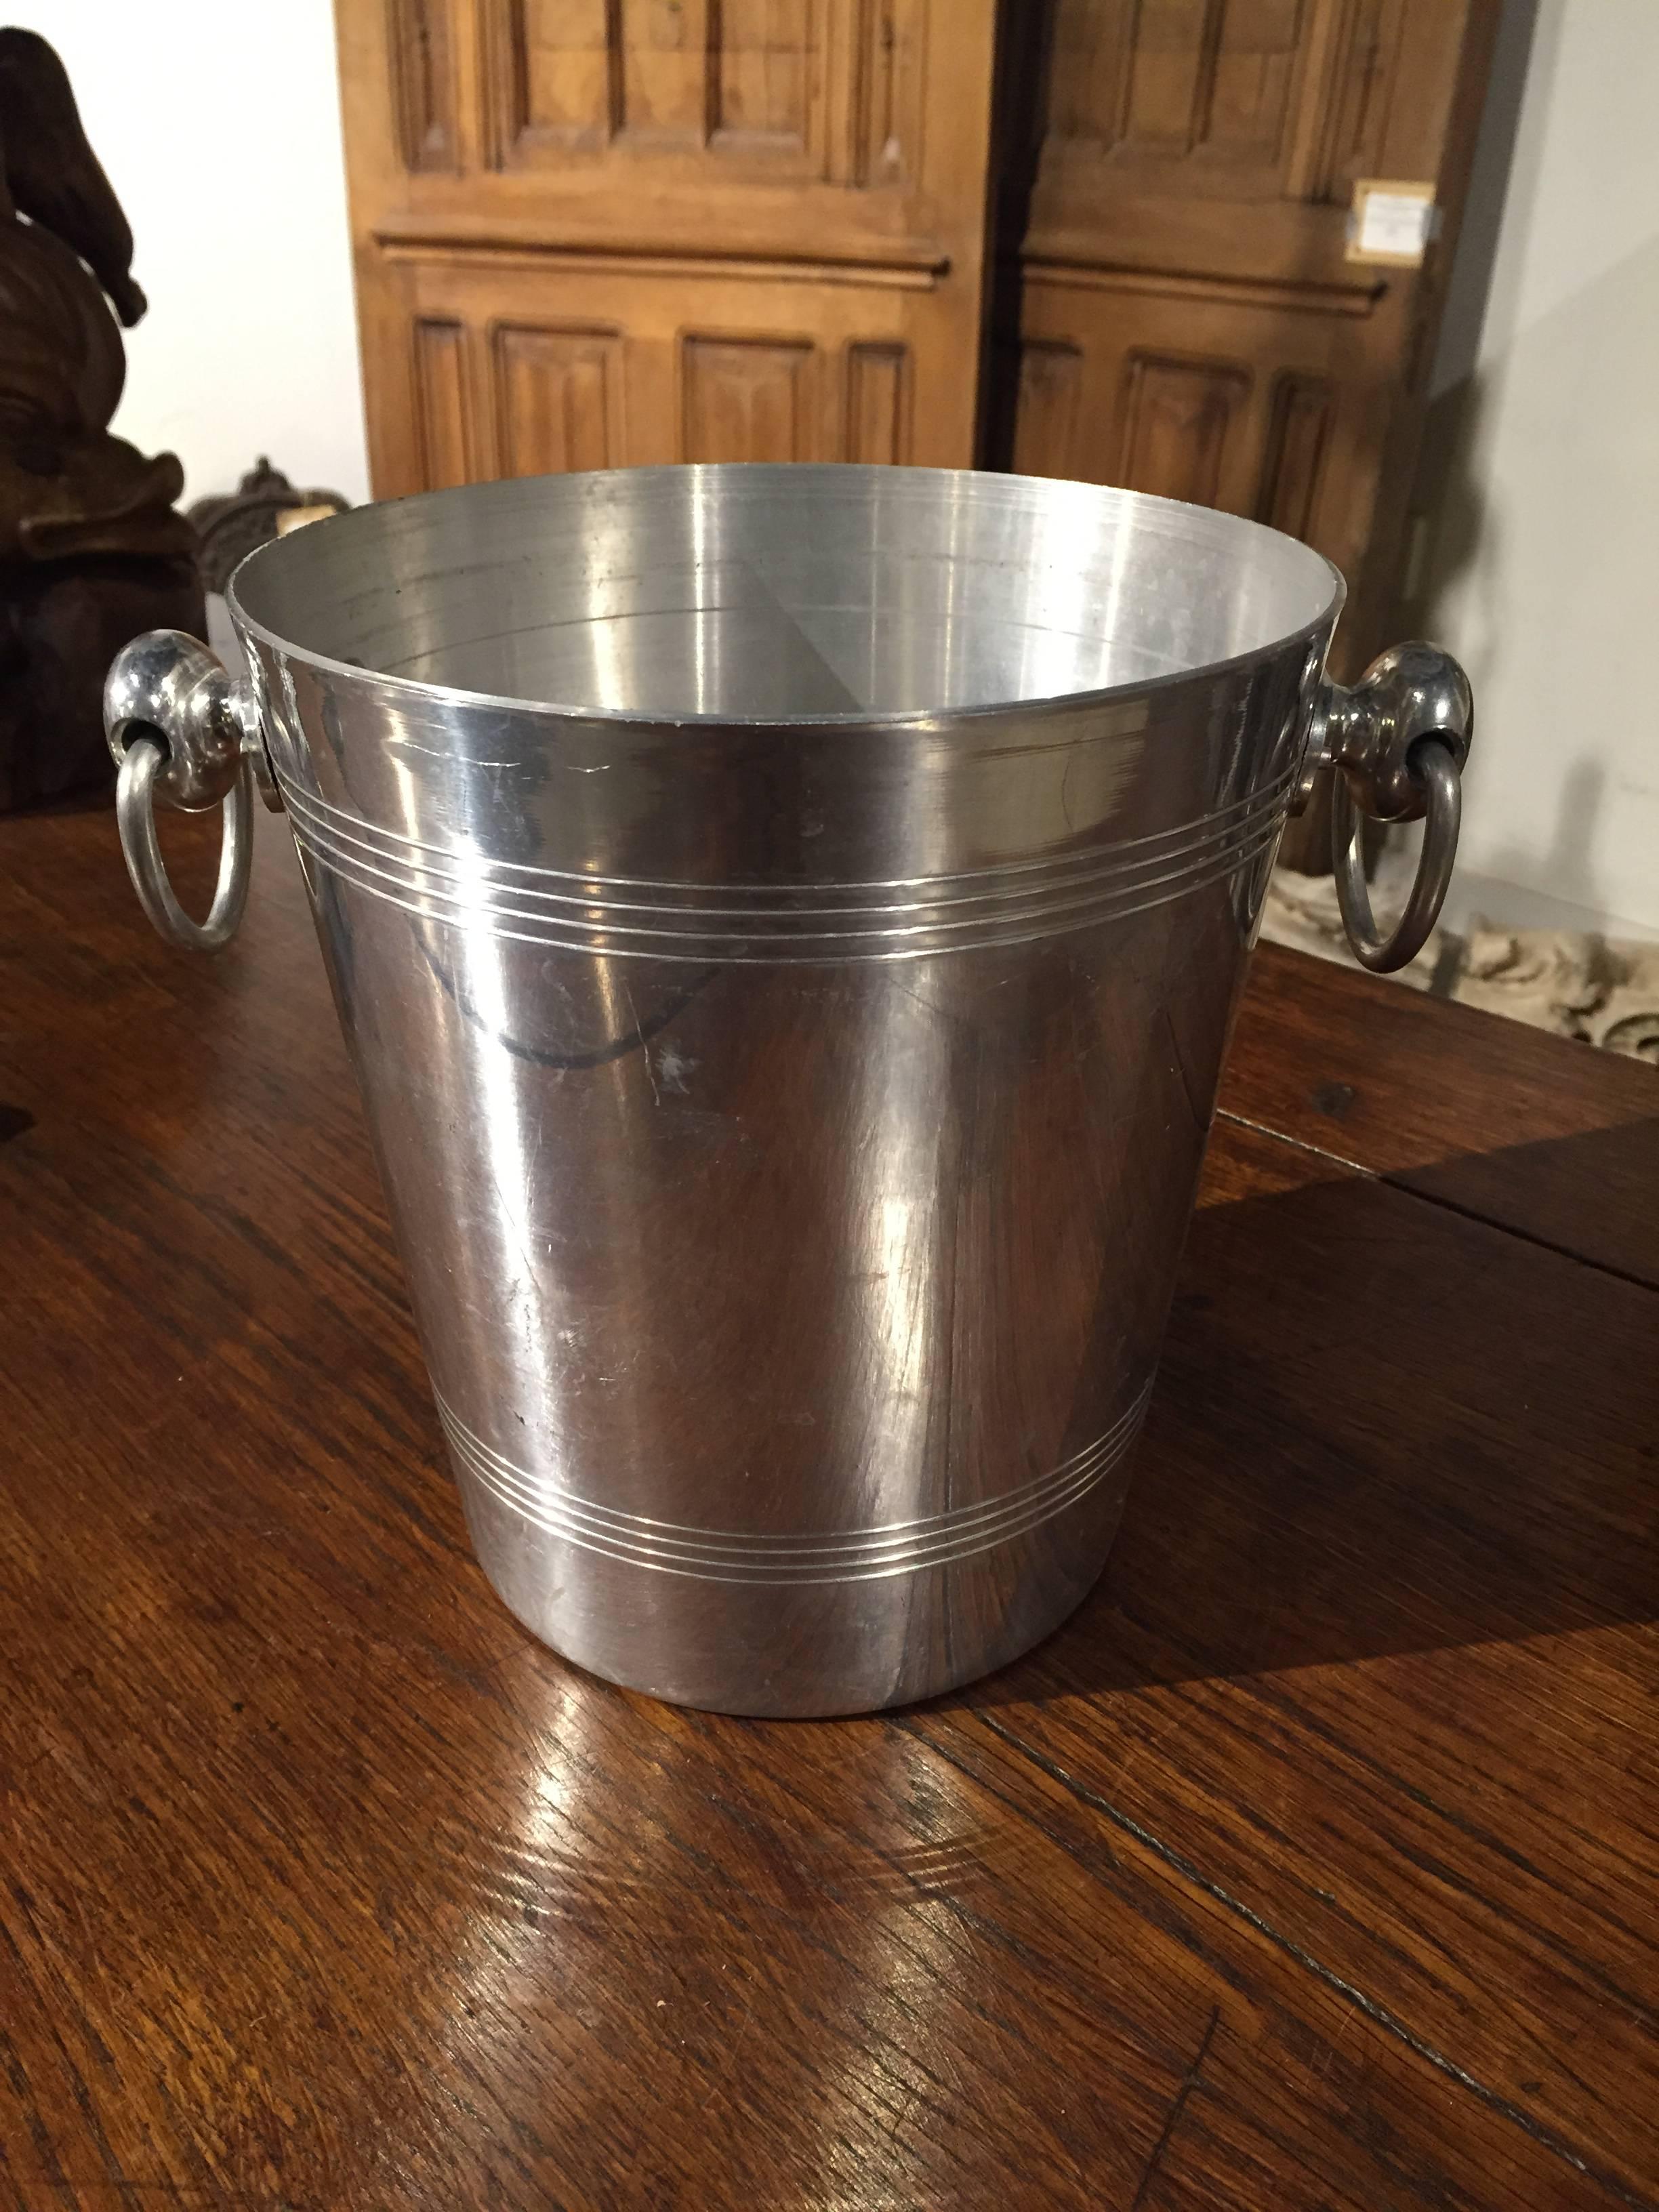 This wonderful champagne bucket has the prestigious Laurent-Perrier Brut L.P. label on the front.  Laurent-Perrier Champagne was founded in 1812 and is recognized as one of the great champagne houses.  Stamped by maker on bottom, and handles make it